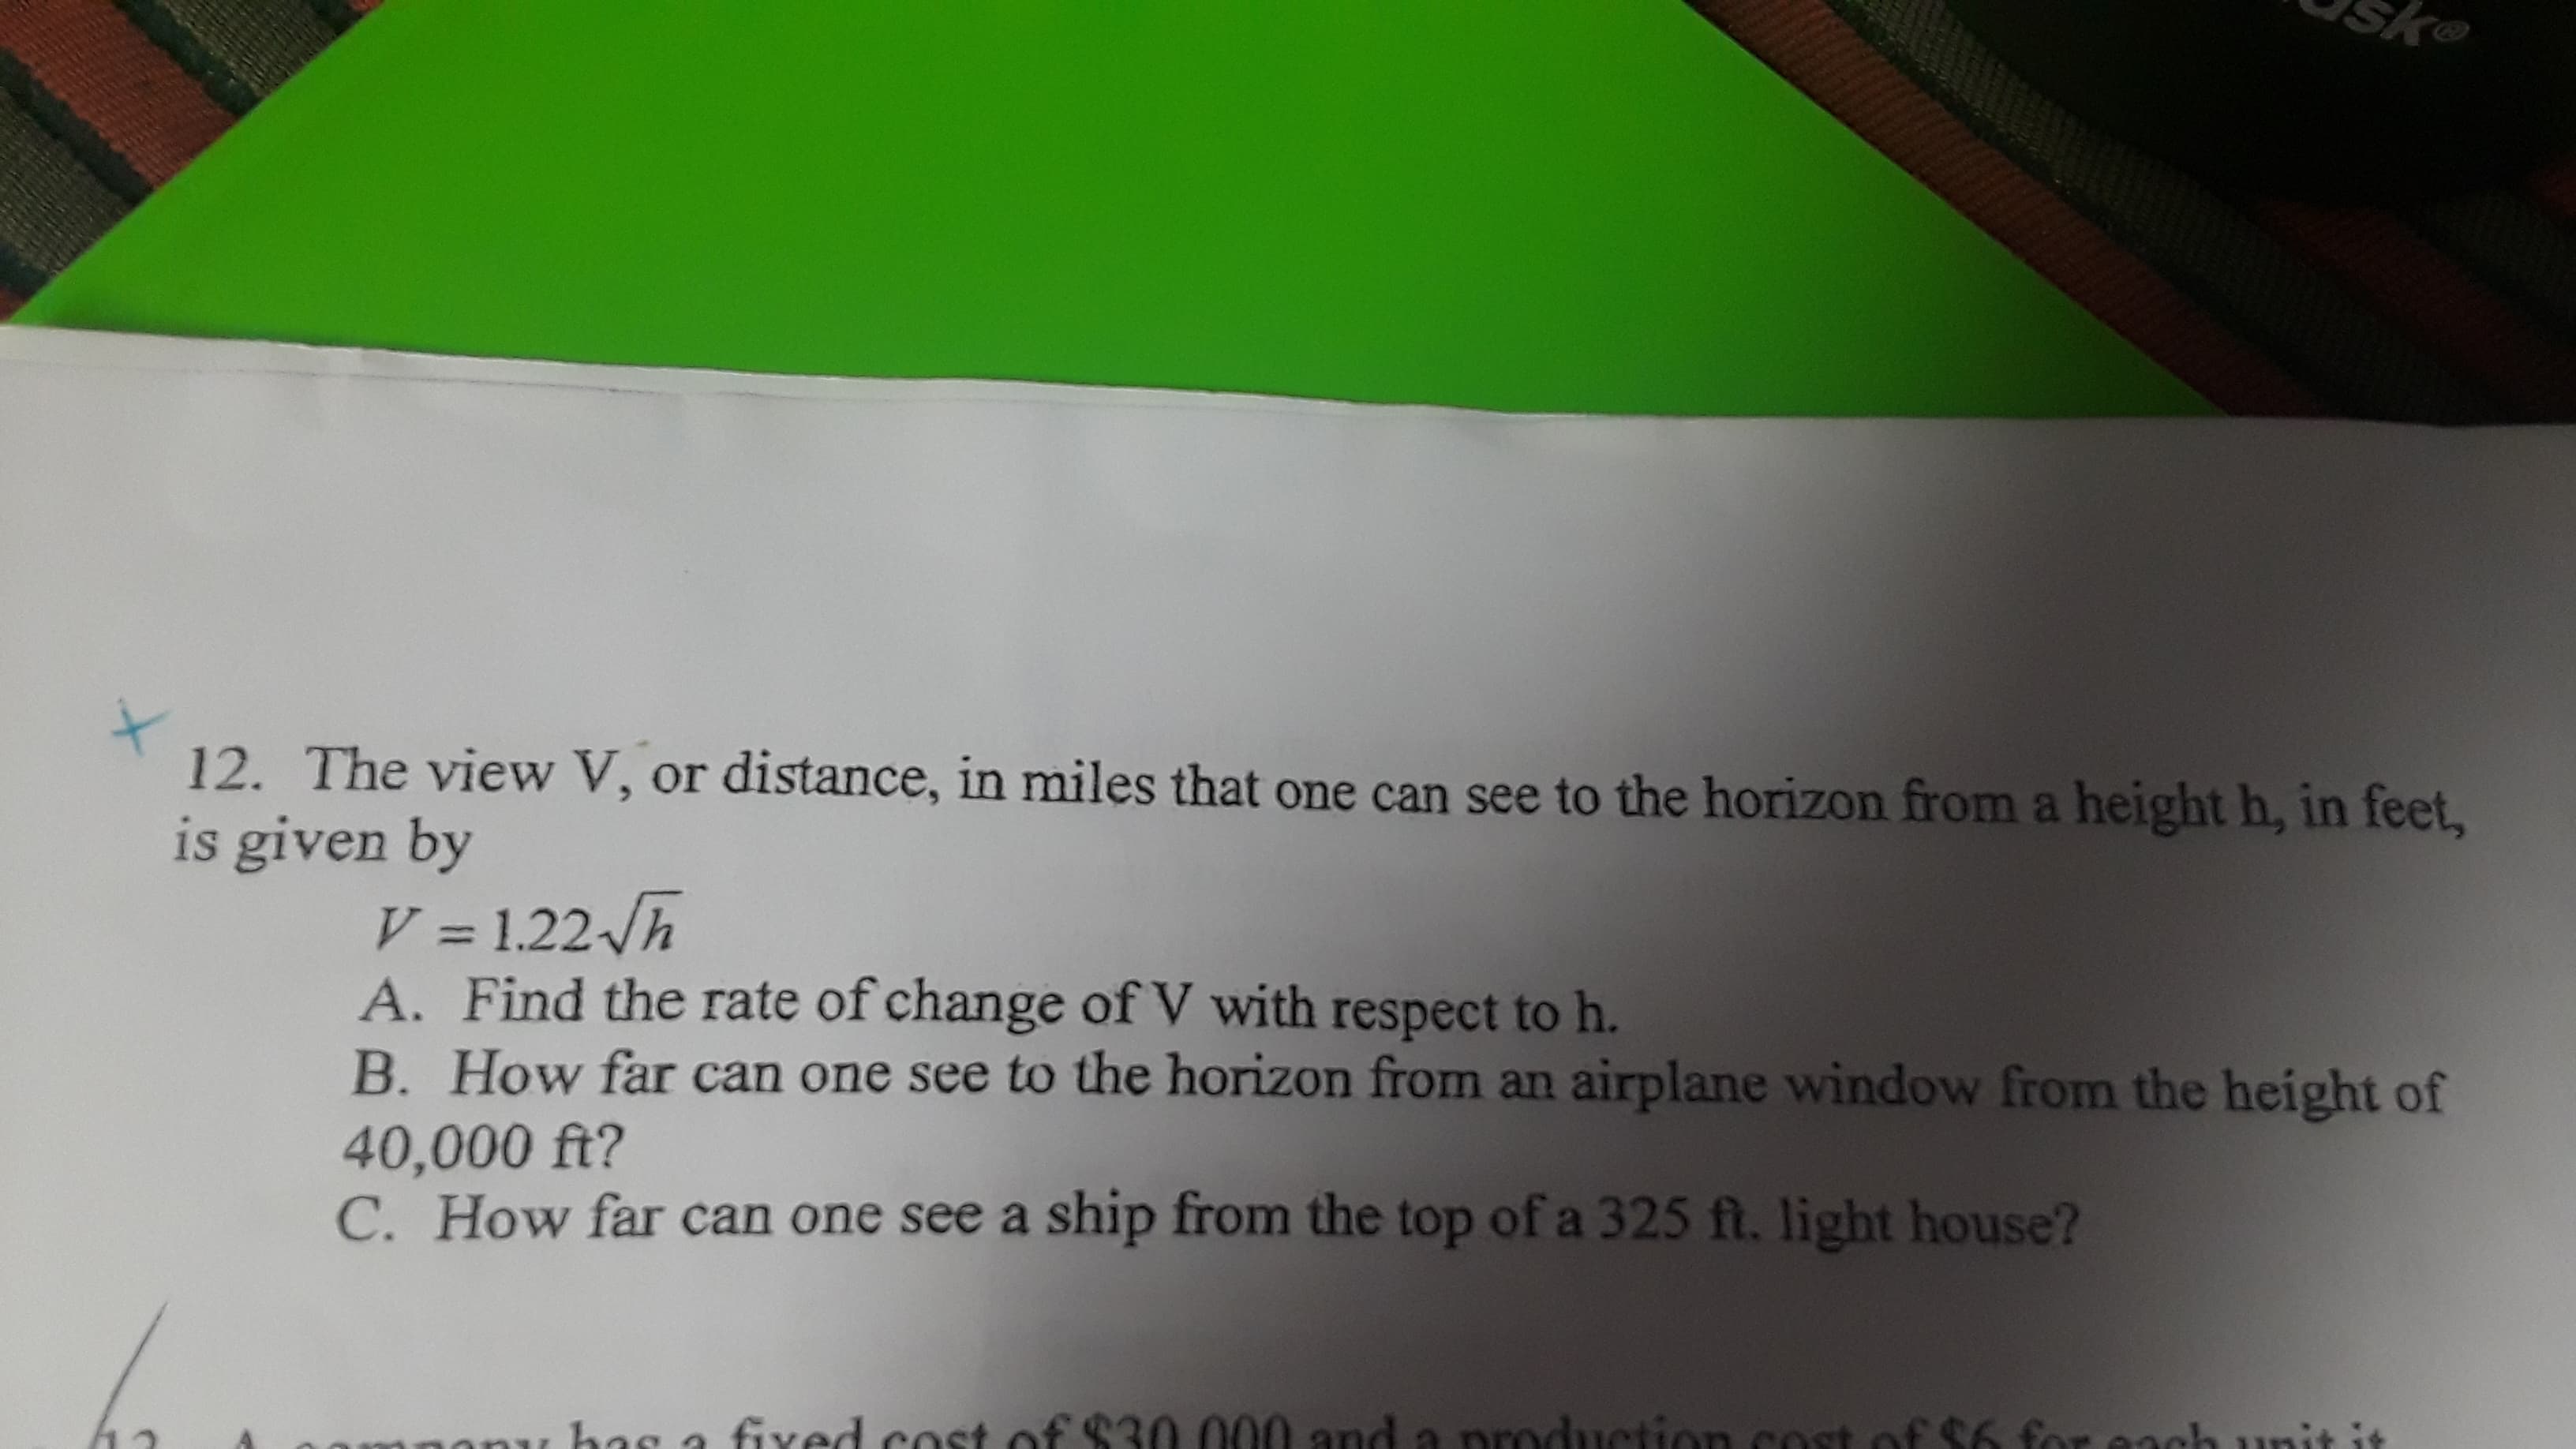 12. The view V, or distance, in miles that one can see to the horizon firom a height h, in feet,
is given by
V = 1.22 h
A. Find the rate of change of V with respect to h.
B. How far can one see to the horizon from an airplane window from the height of
40,000 ft?
C. How far can one see a ship from the top of a 325 ft. light house?
a fived cost of $30.000 and a
production cost of $6 for each
hunit
